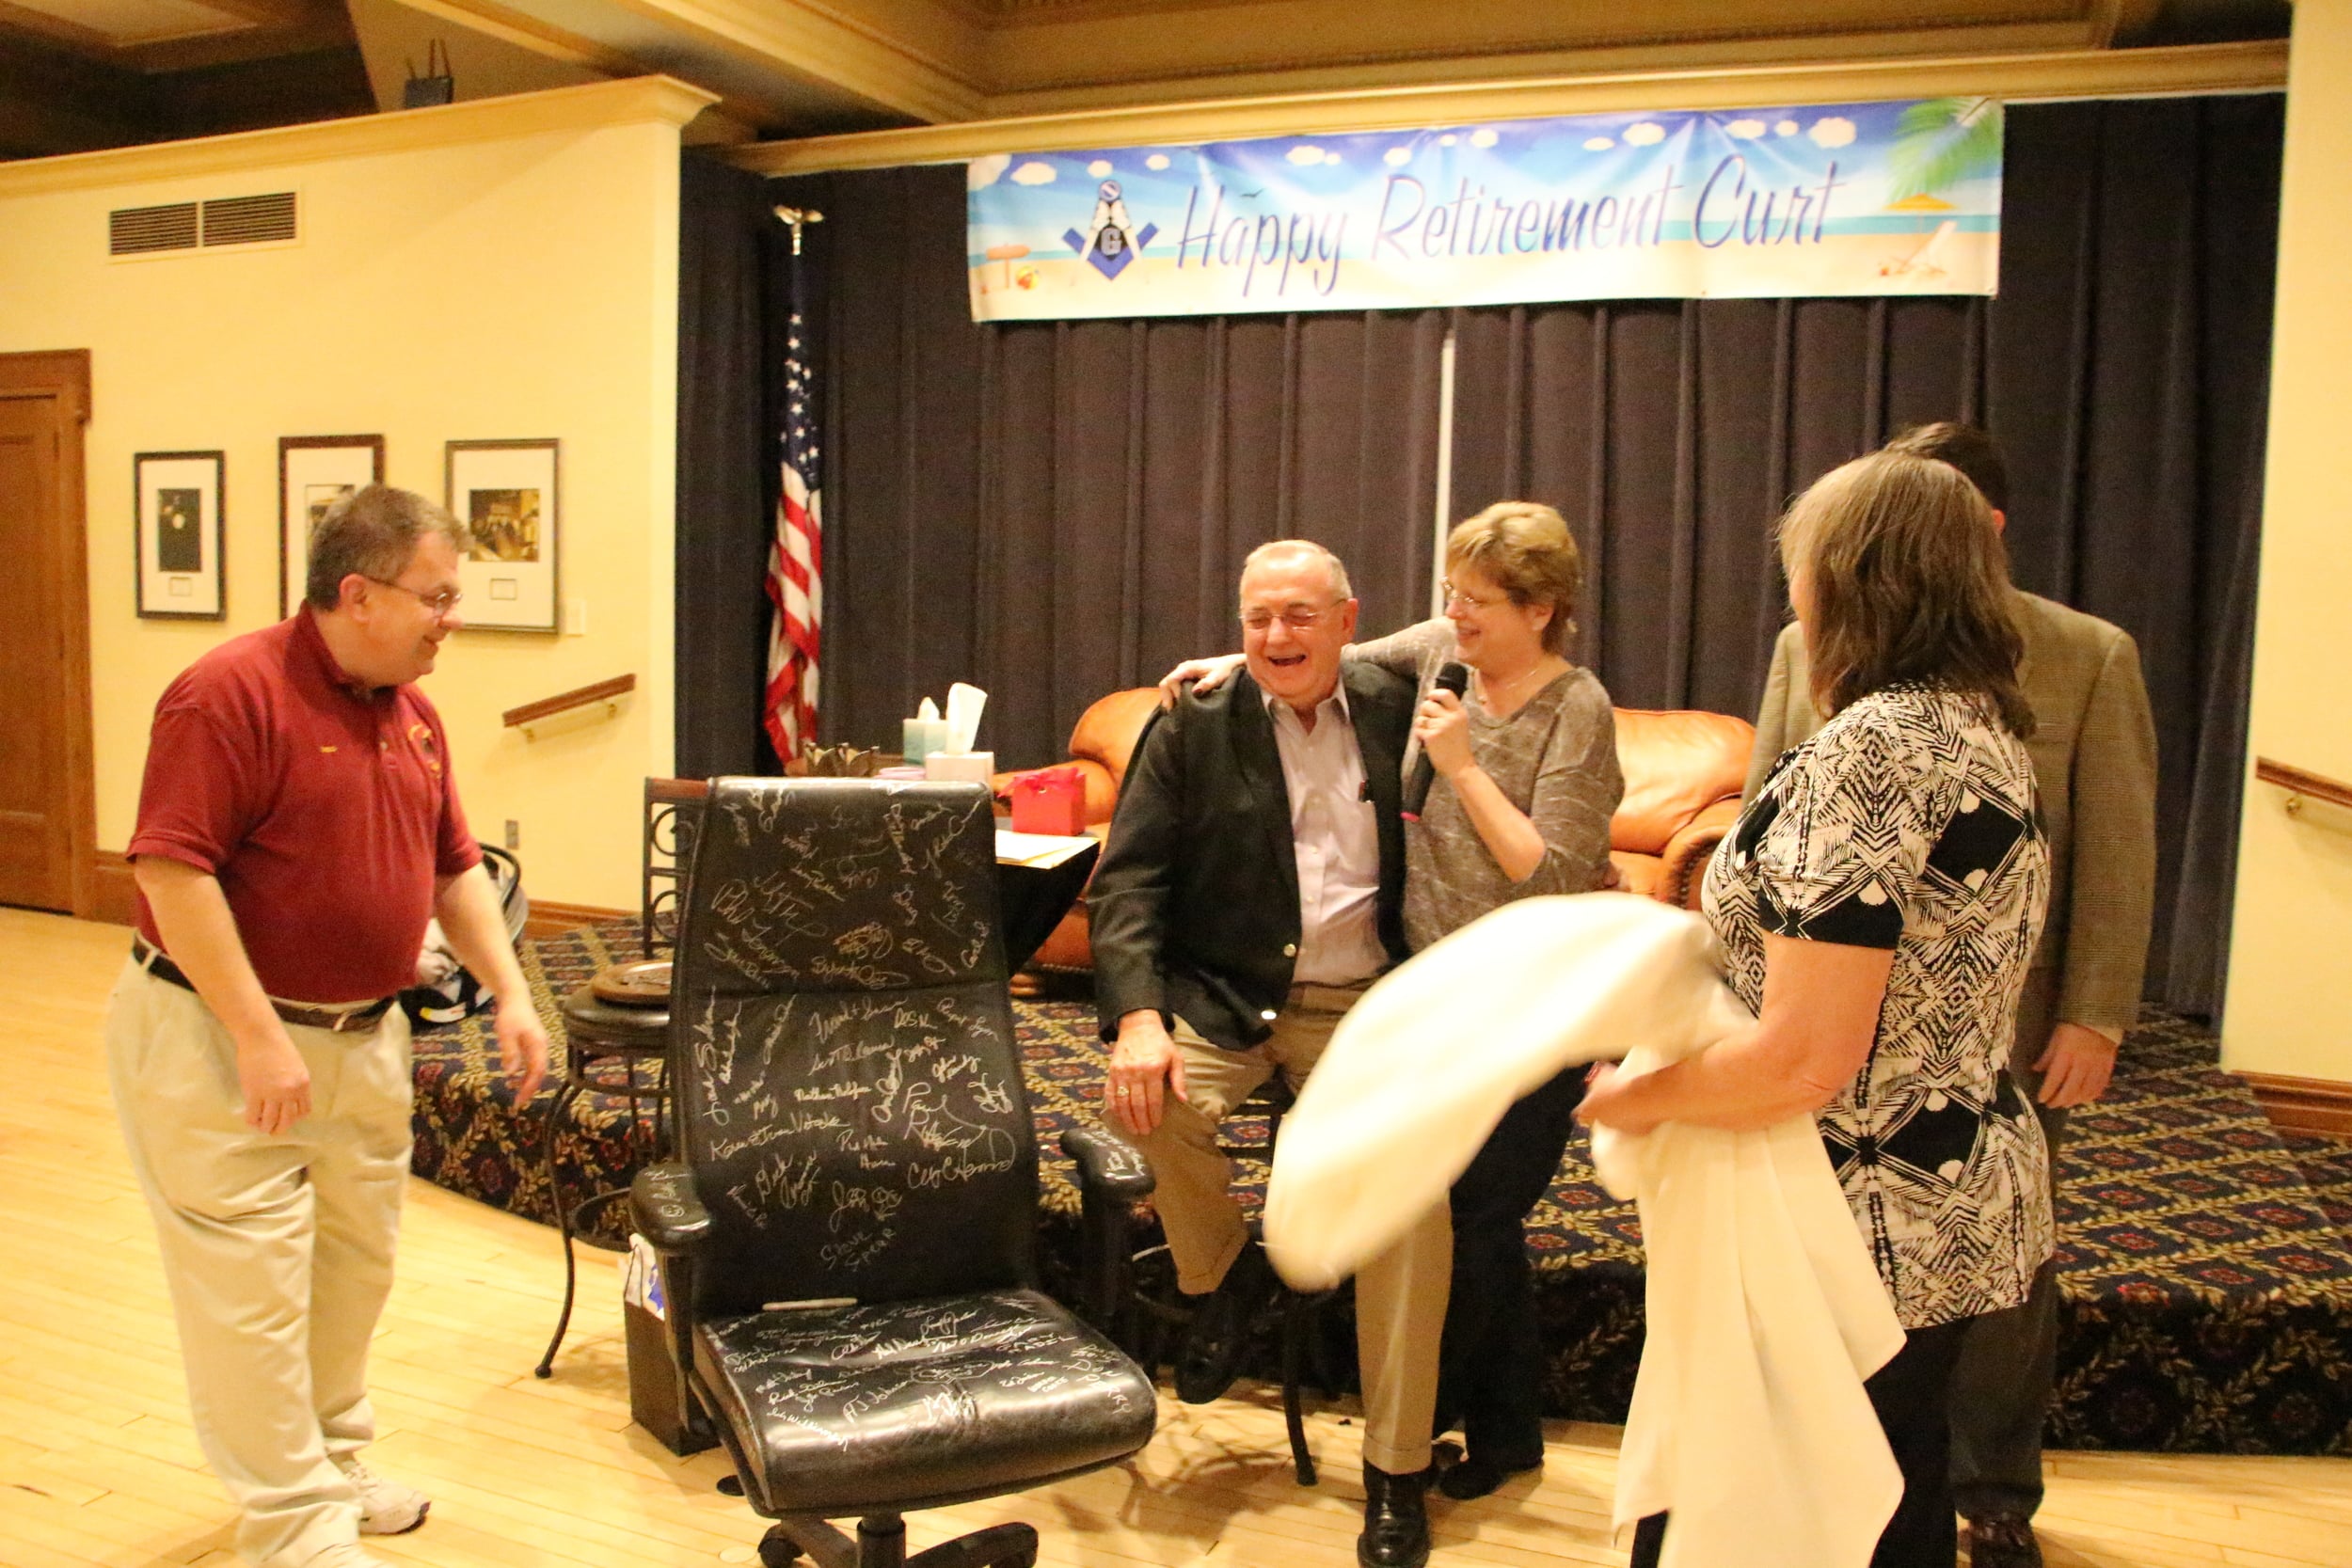 Presenting Curt with his office chair, signed by Masons